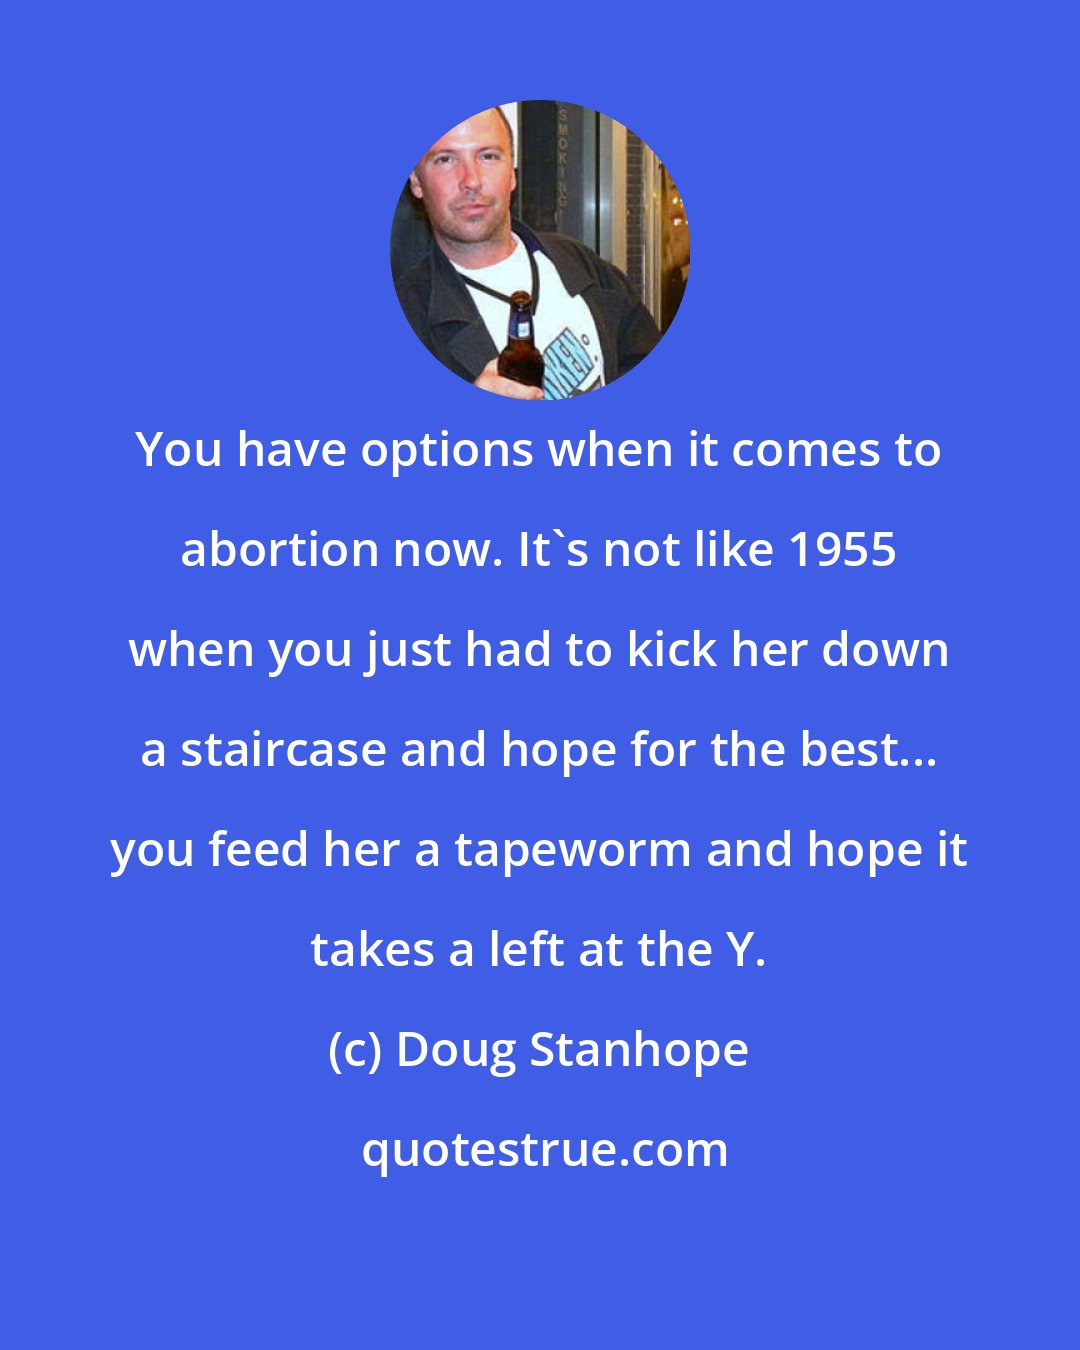 Doug Stanhope: You have options when it comes to abortion now. It's not like 1955 when you just had to kick her down a staircase and hope for the best... you feed her a tapeworm and hope it takes a left at the Y.